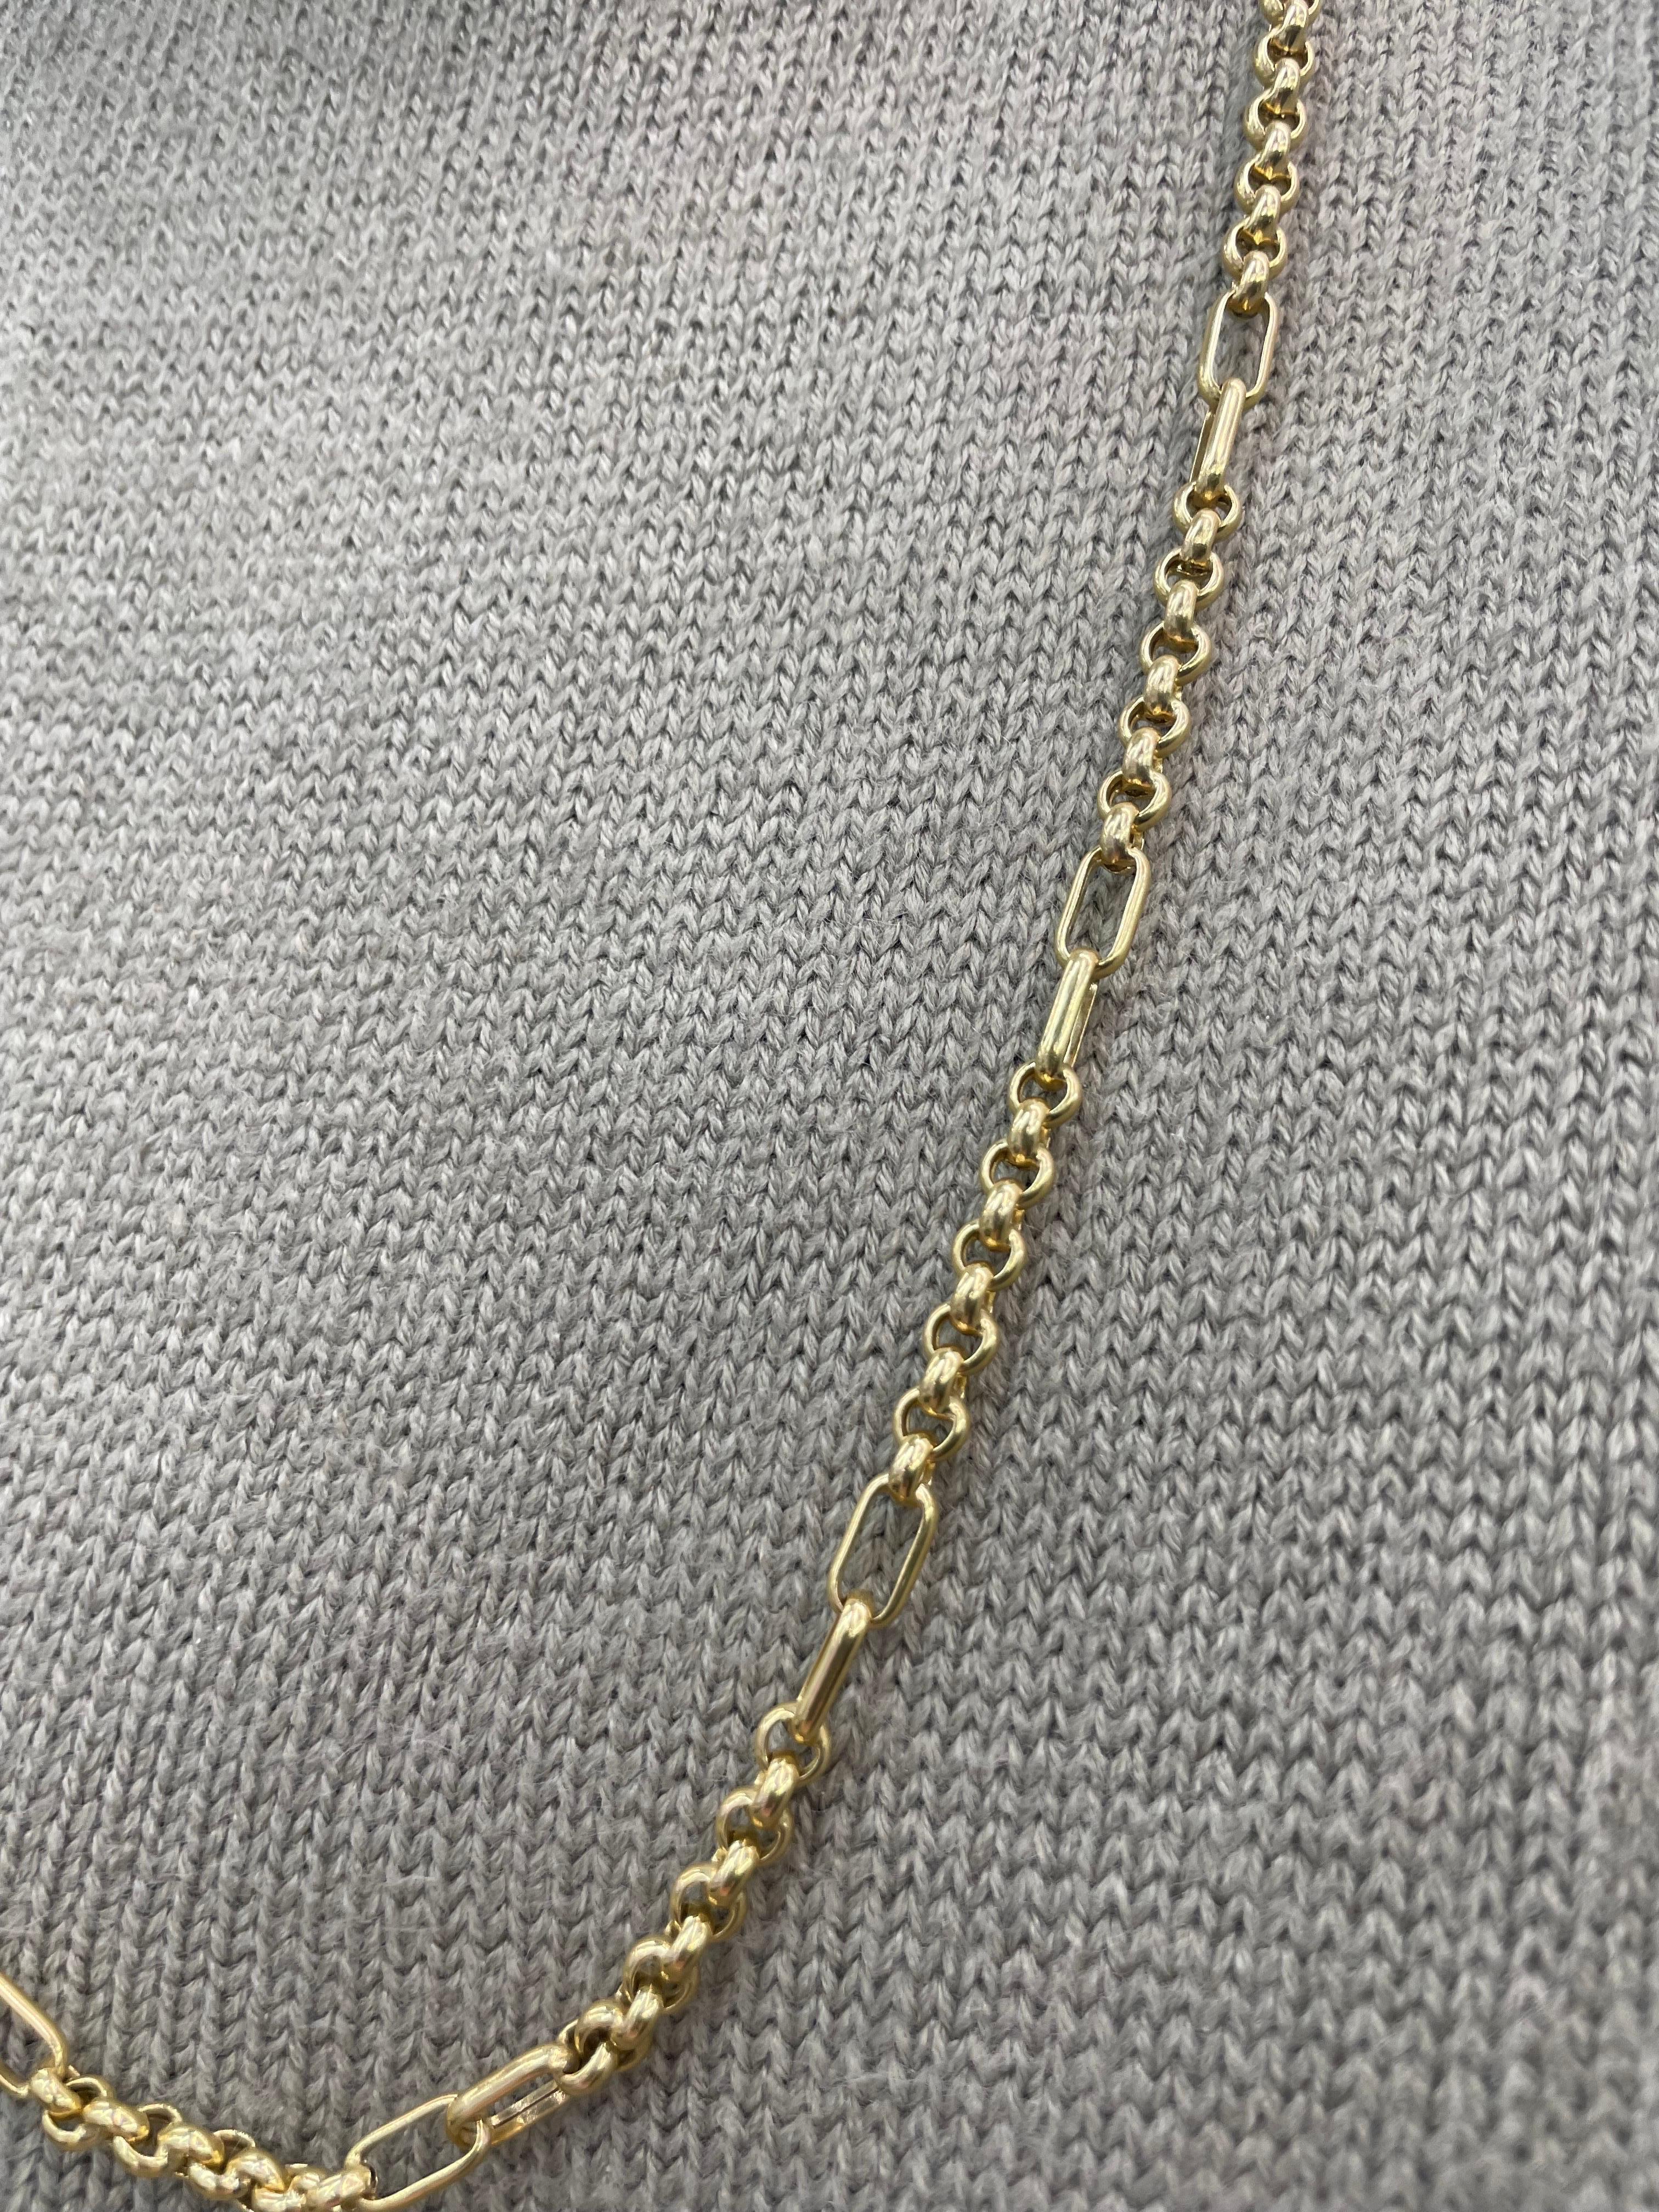 14 Karat Yellow Gold Link Necklace 25.6 Grams 36.5 Inches For Sale 6